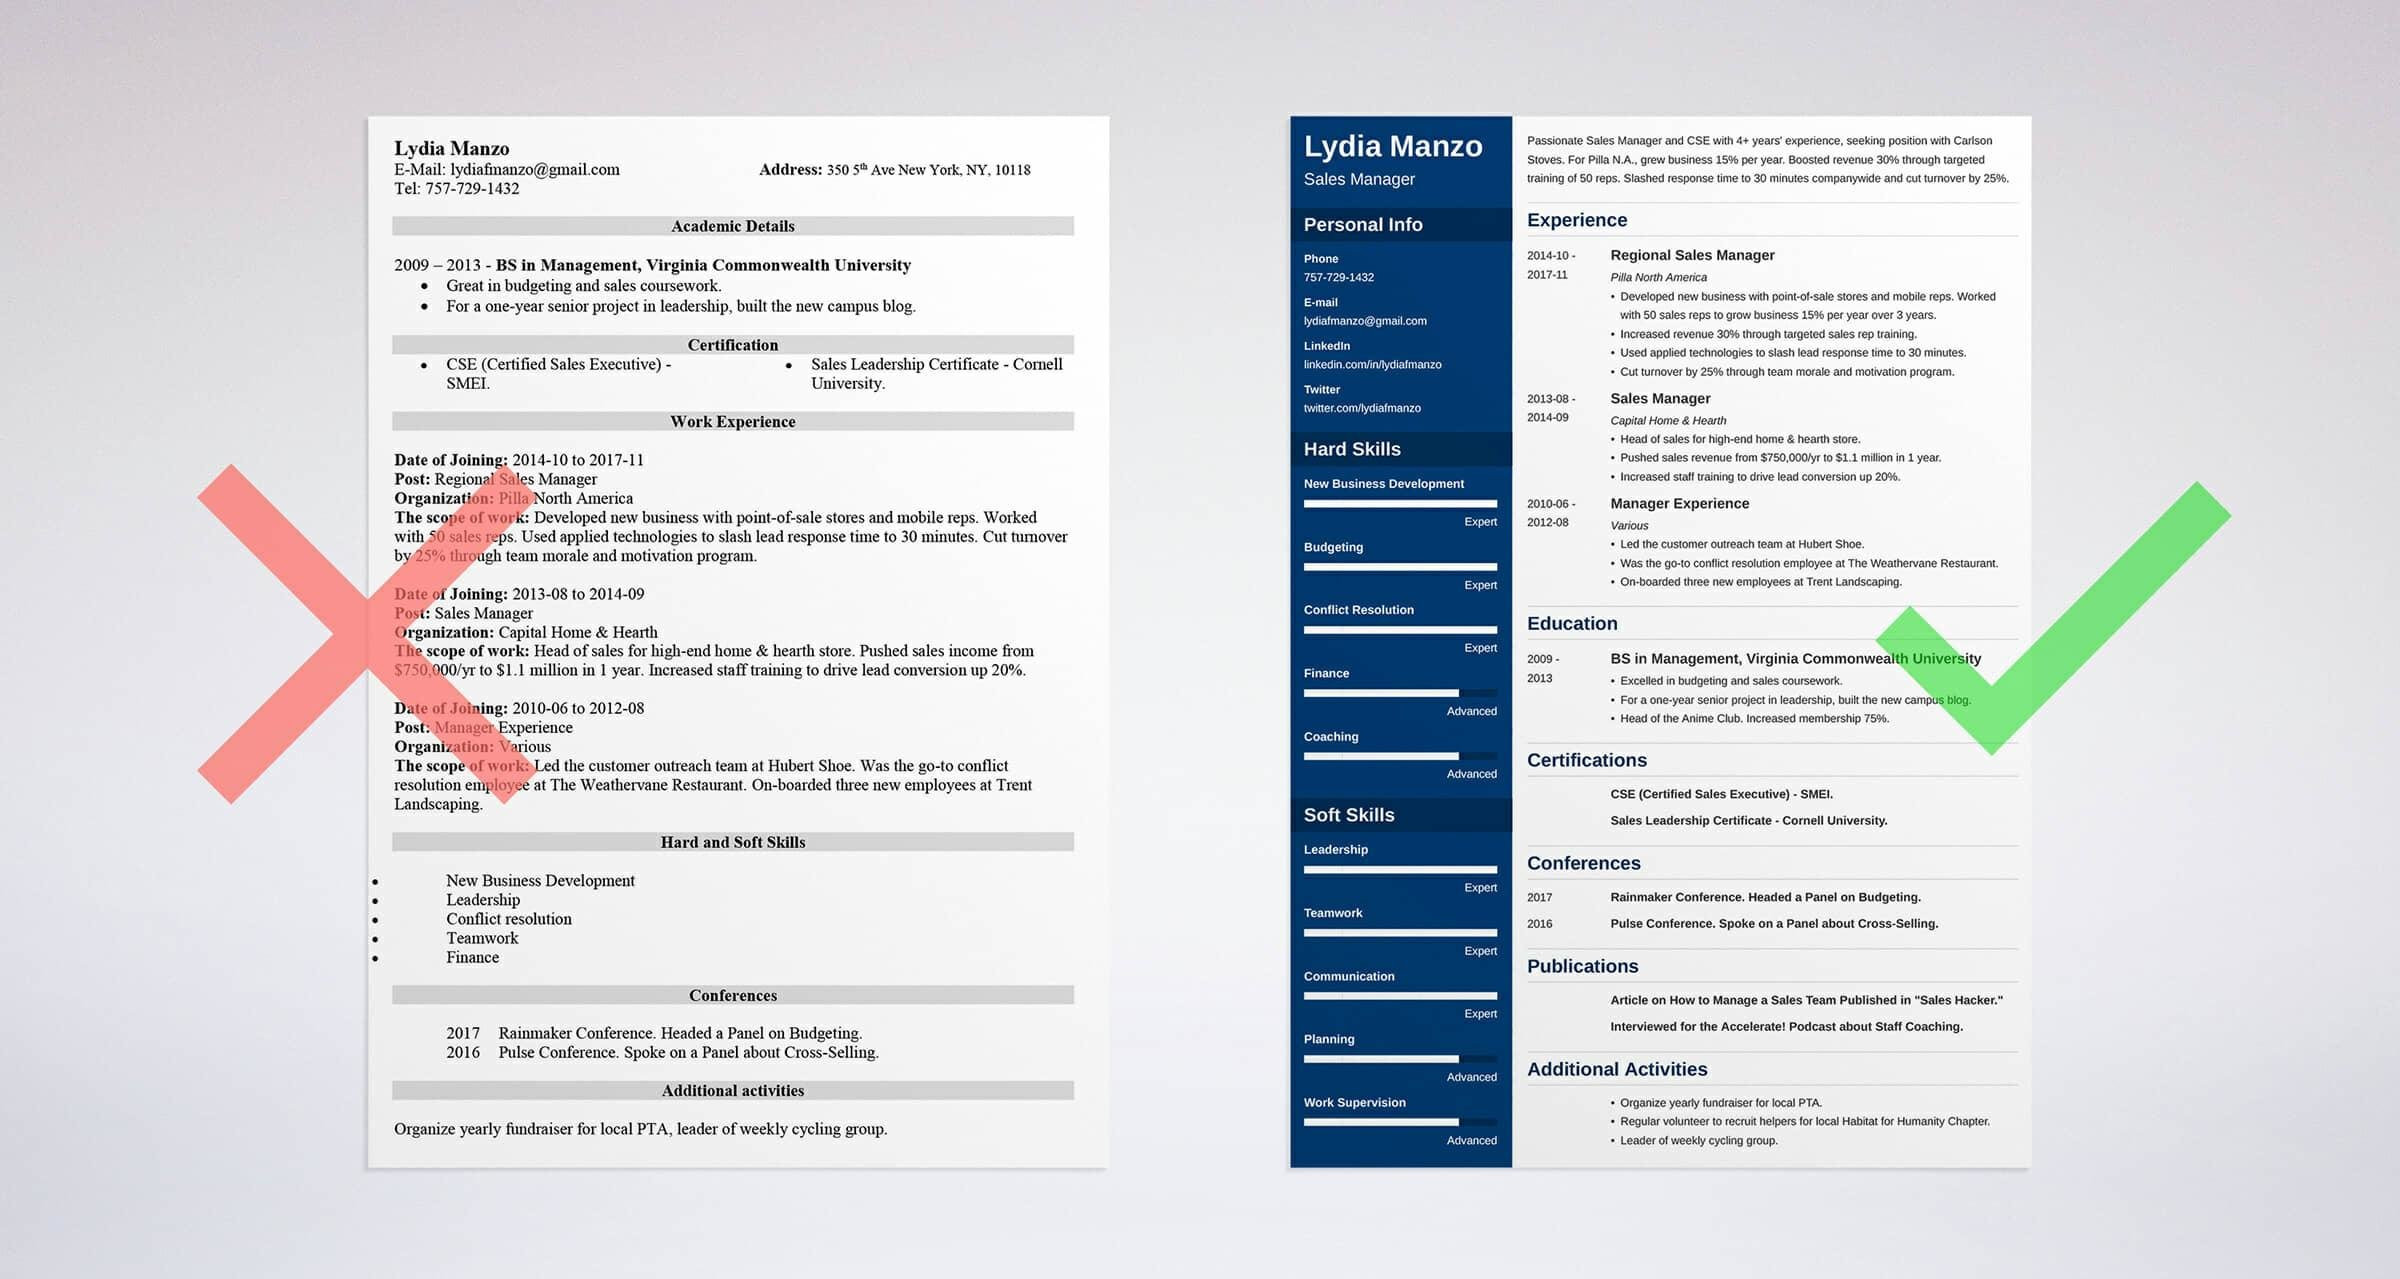 Sample Skills and Abilities for Management Resume Manager Resume Examples [skills, Job Description]